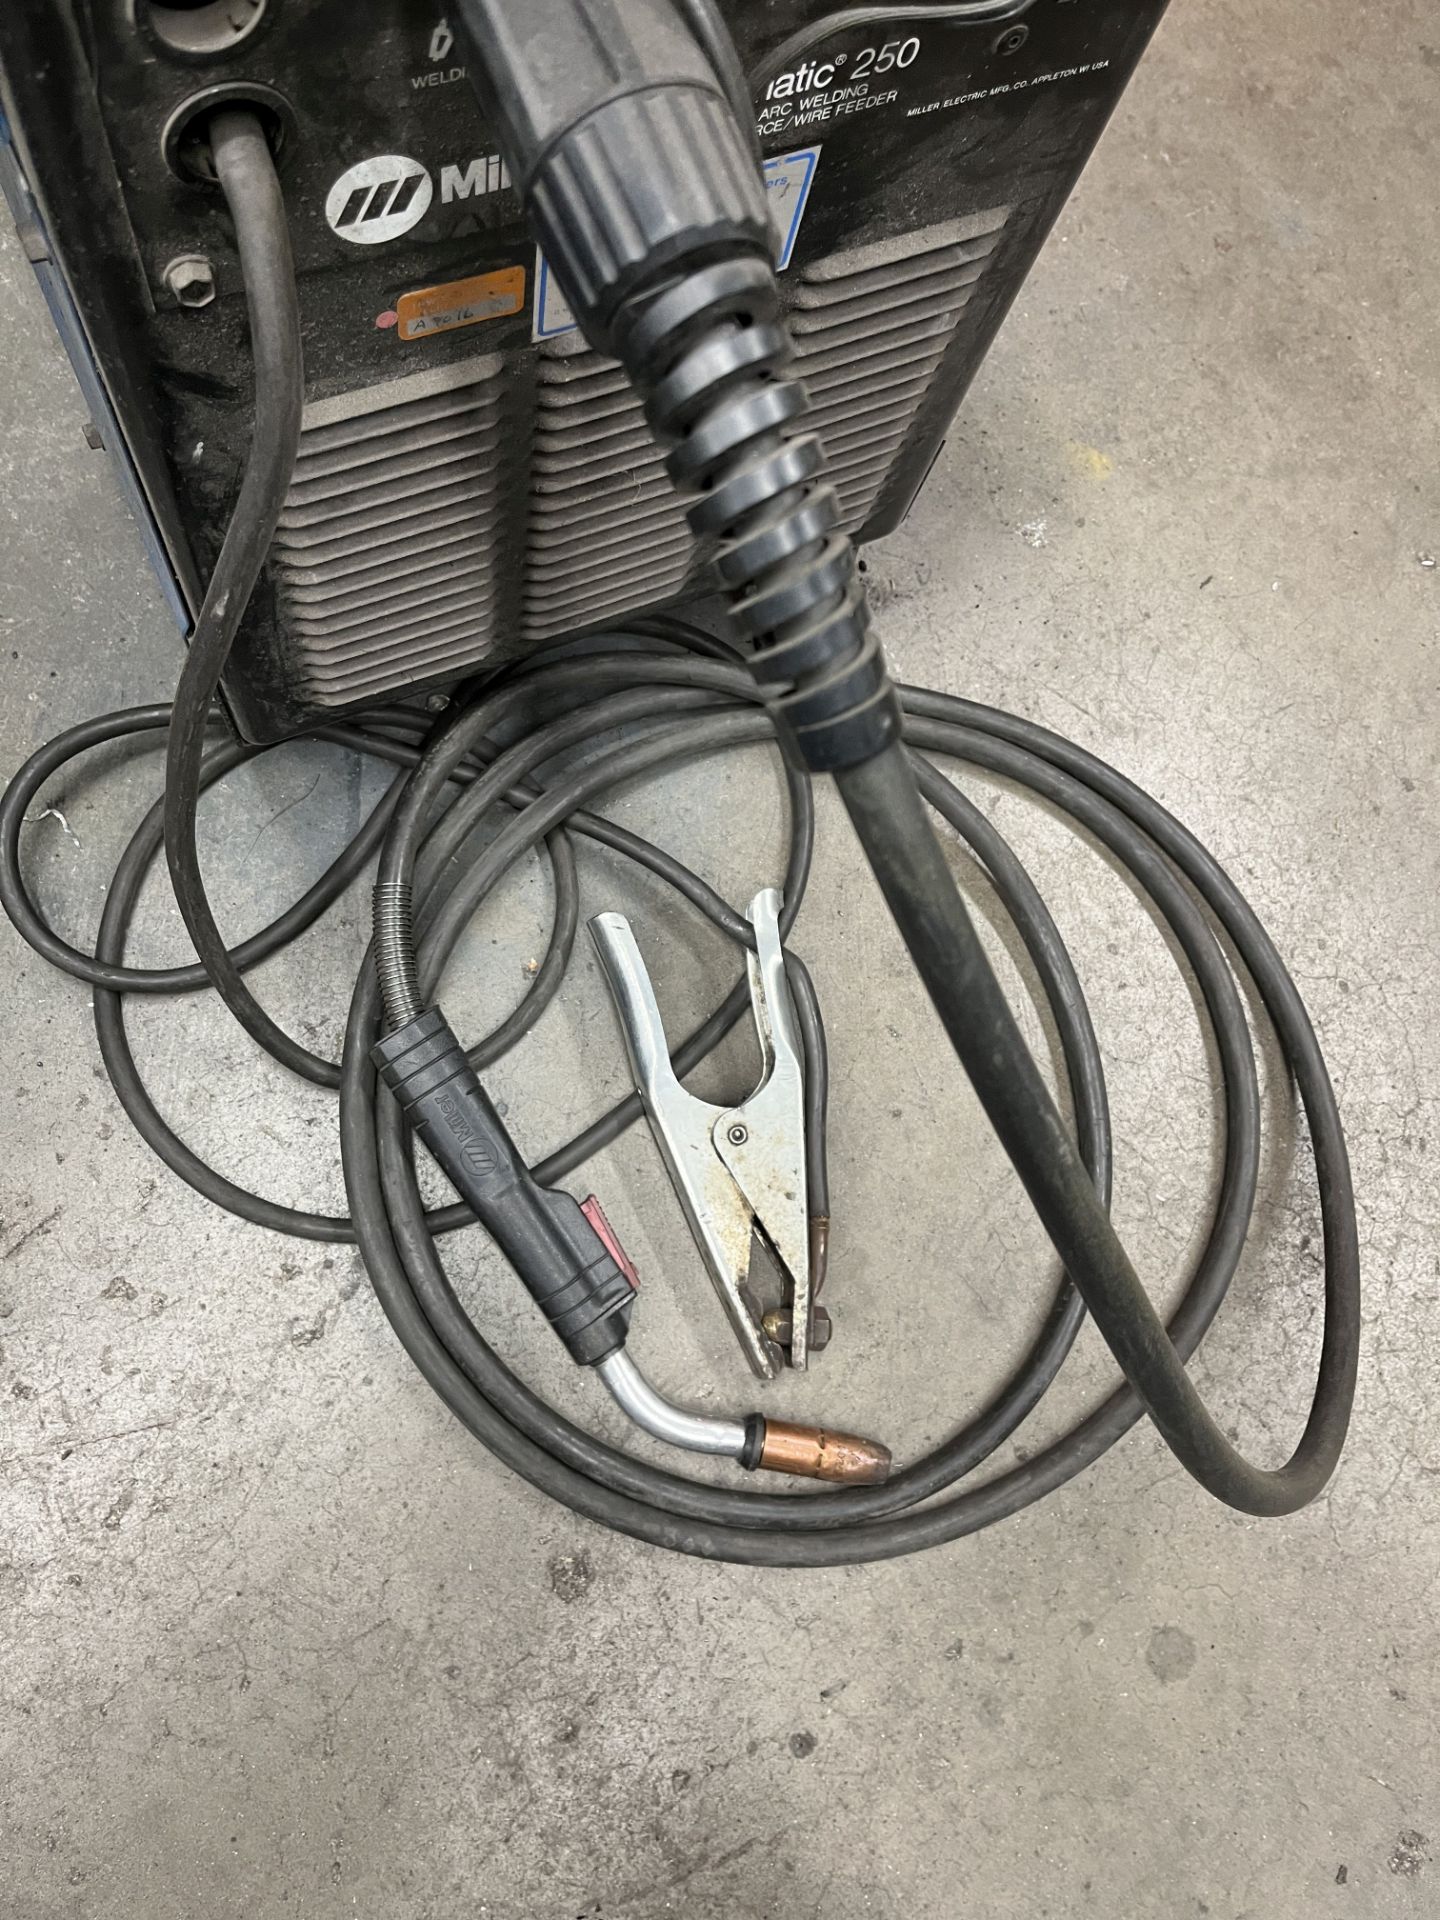 MILLER MODEL MILLERMATIC 250 CV/DC ARC WELDER; S/N KG068432, WITH INTERNAL WIRE FEED, CABLE WITH - Image 4 of 12